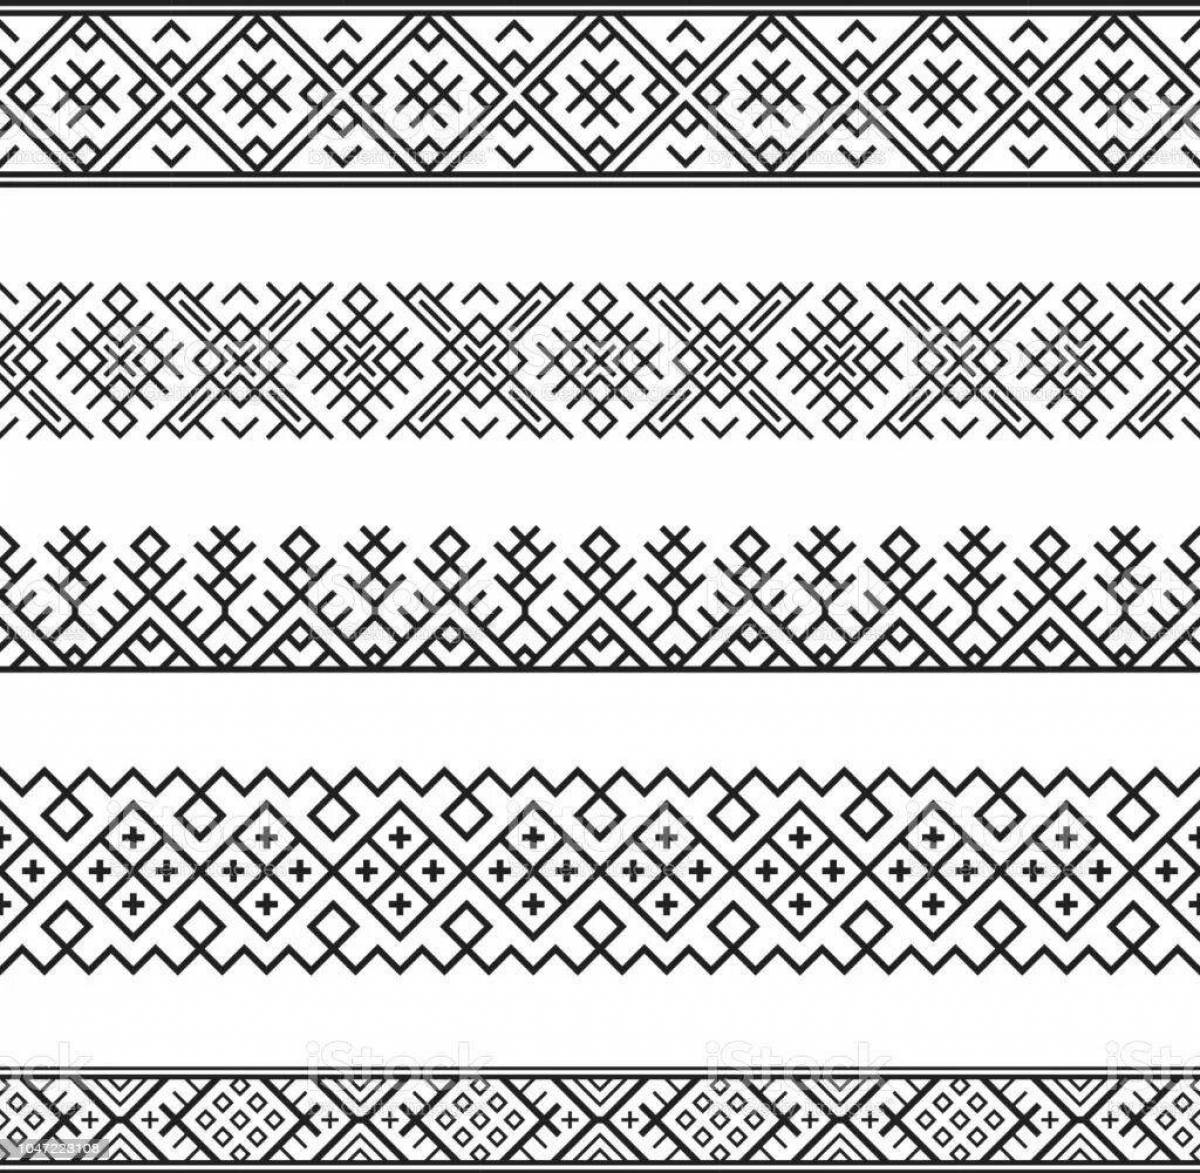 Attractive Chuvash coloring patterns